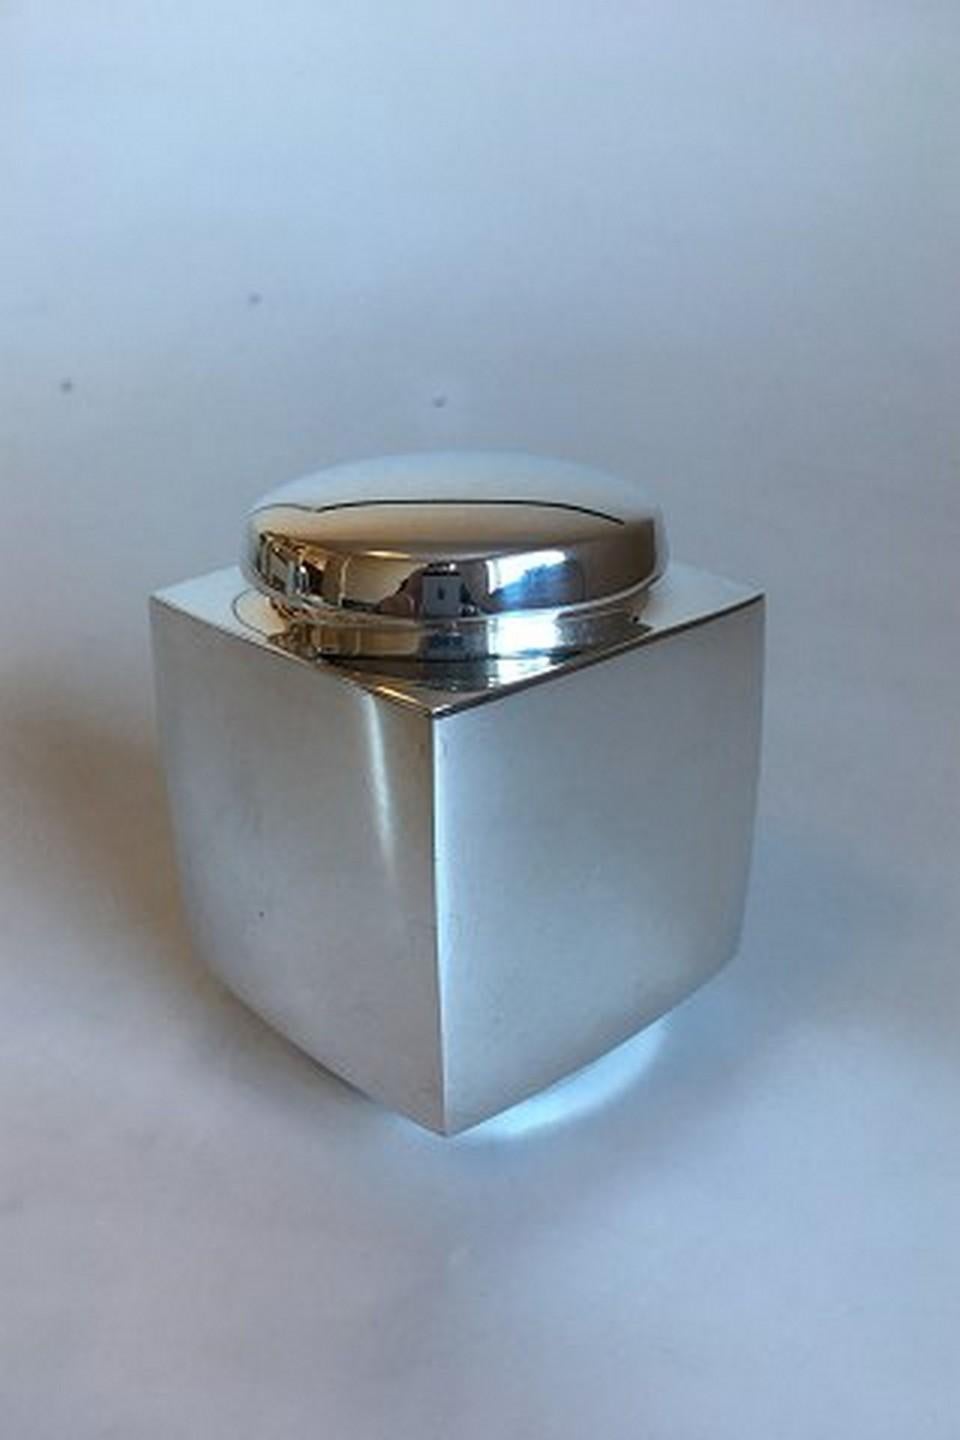 Hans Hansen sterling silver square tea box with round lid by Karl Gustav Hansen No. 2/100 from 1984. Measures 8.5 x 7 x 7 cm / 3 11/32 x 2 3/4 x 2 3/4